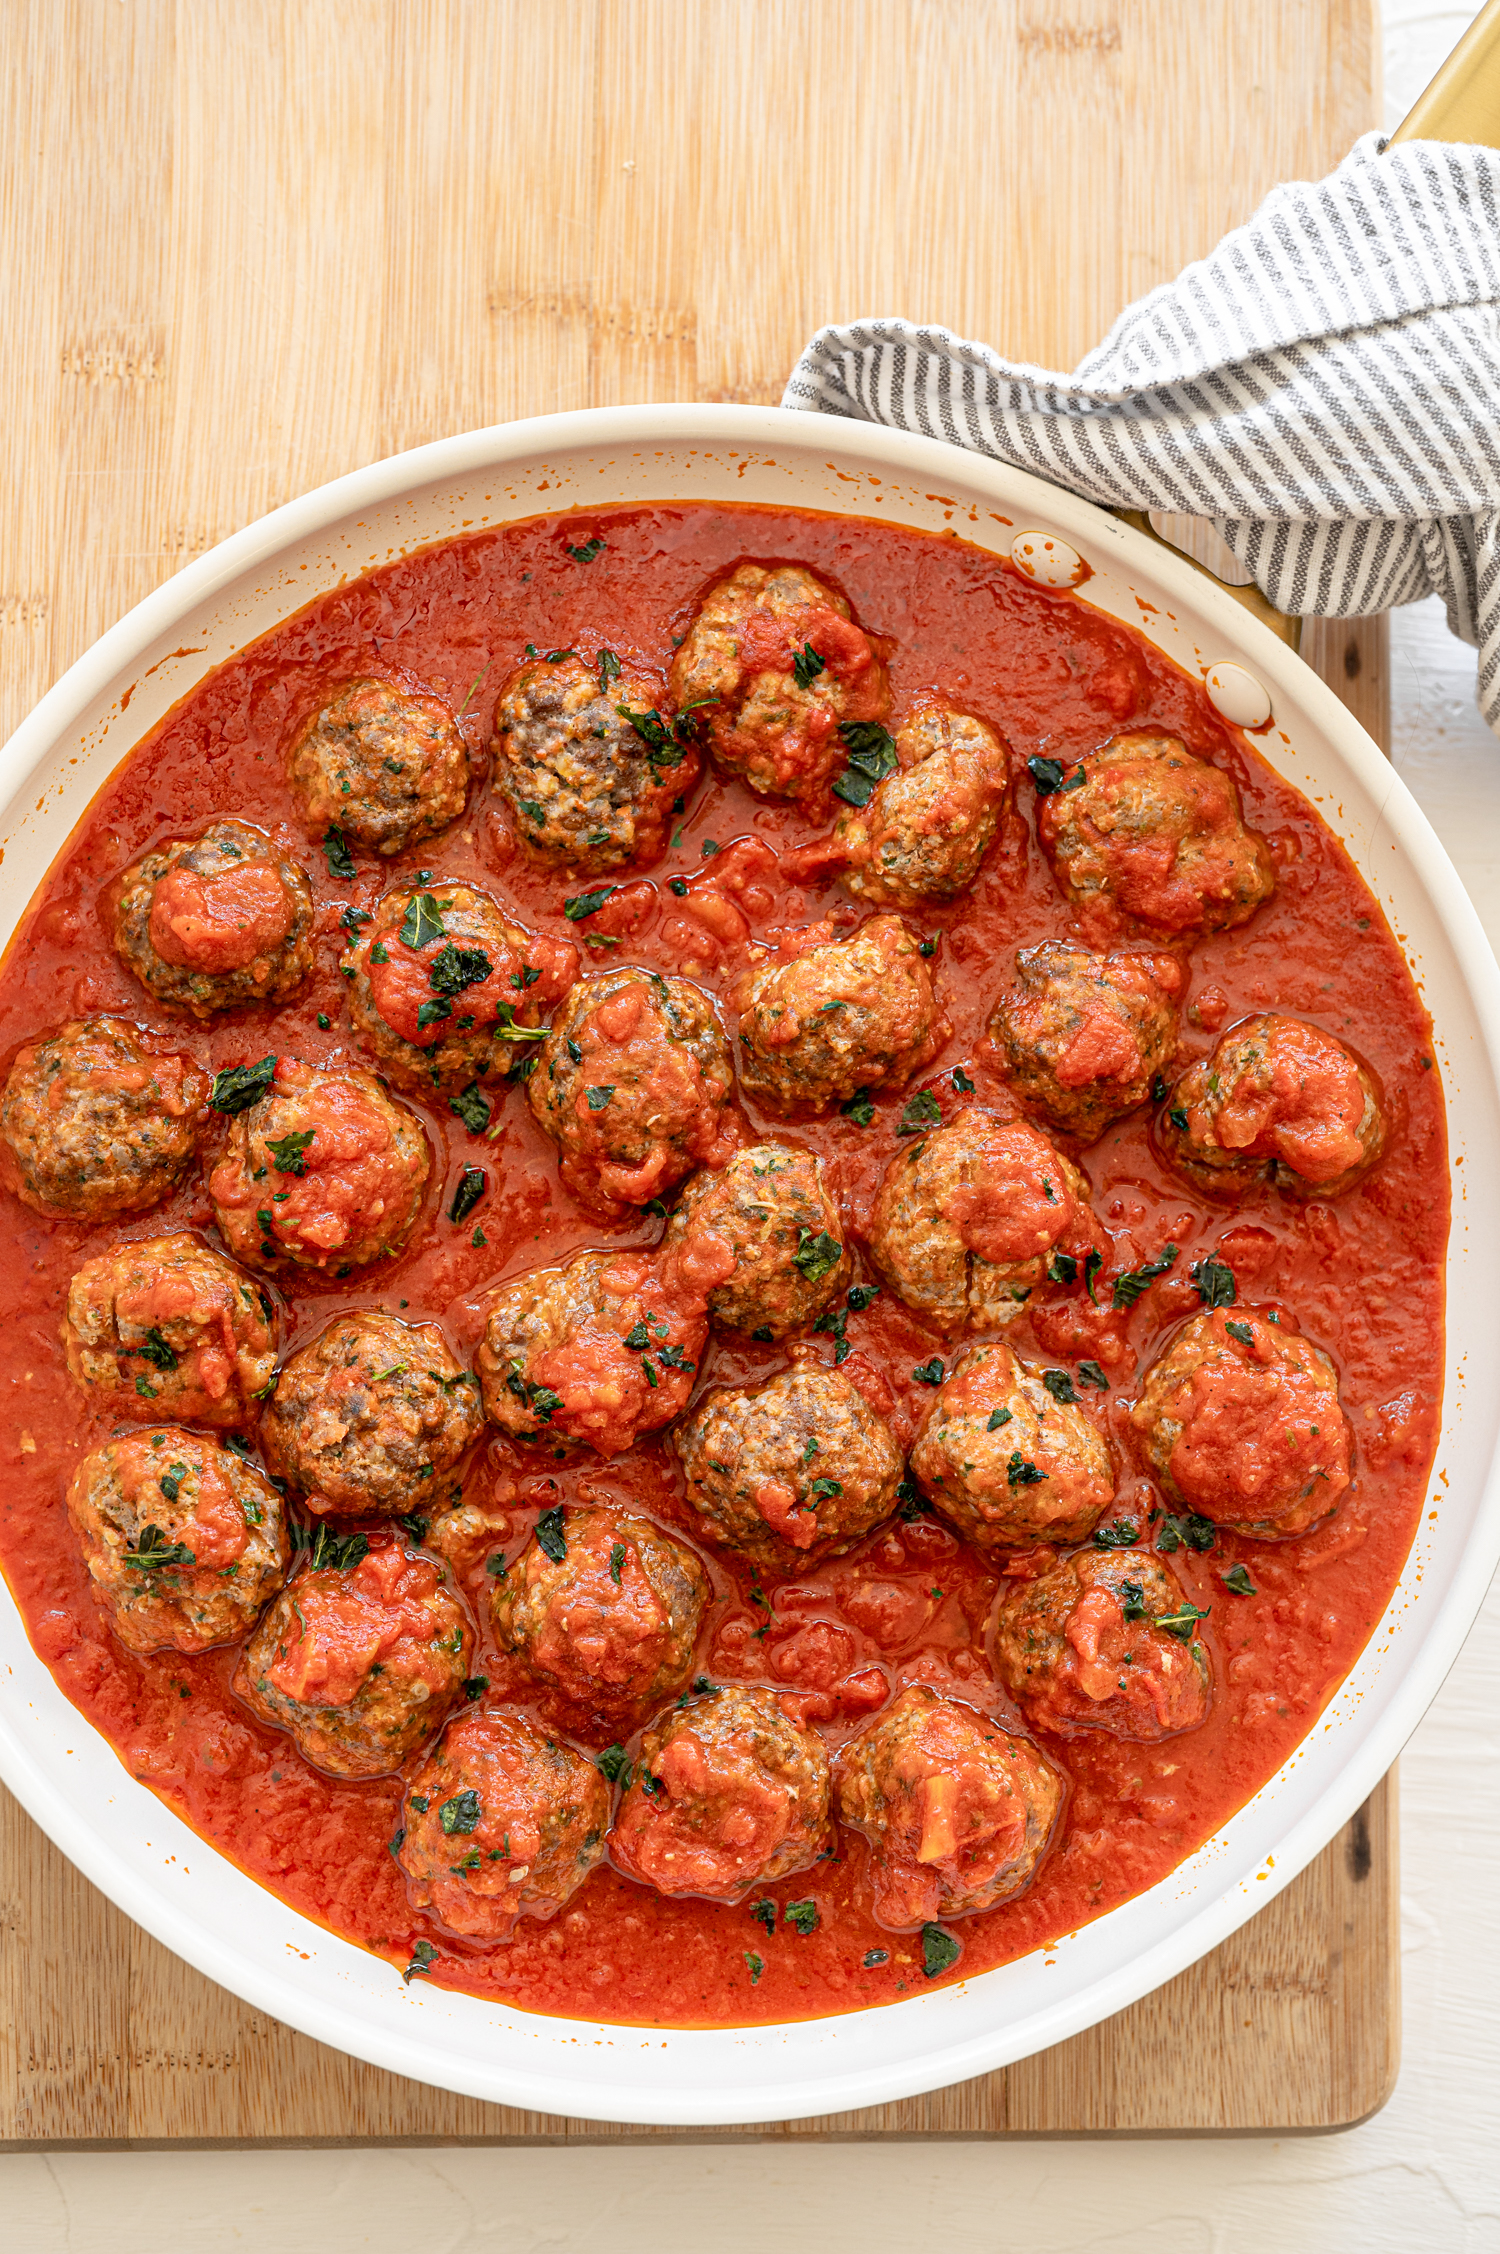 A shallow platter with meatballs and sauce.